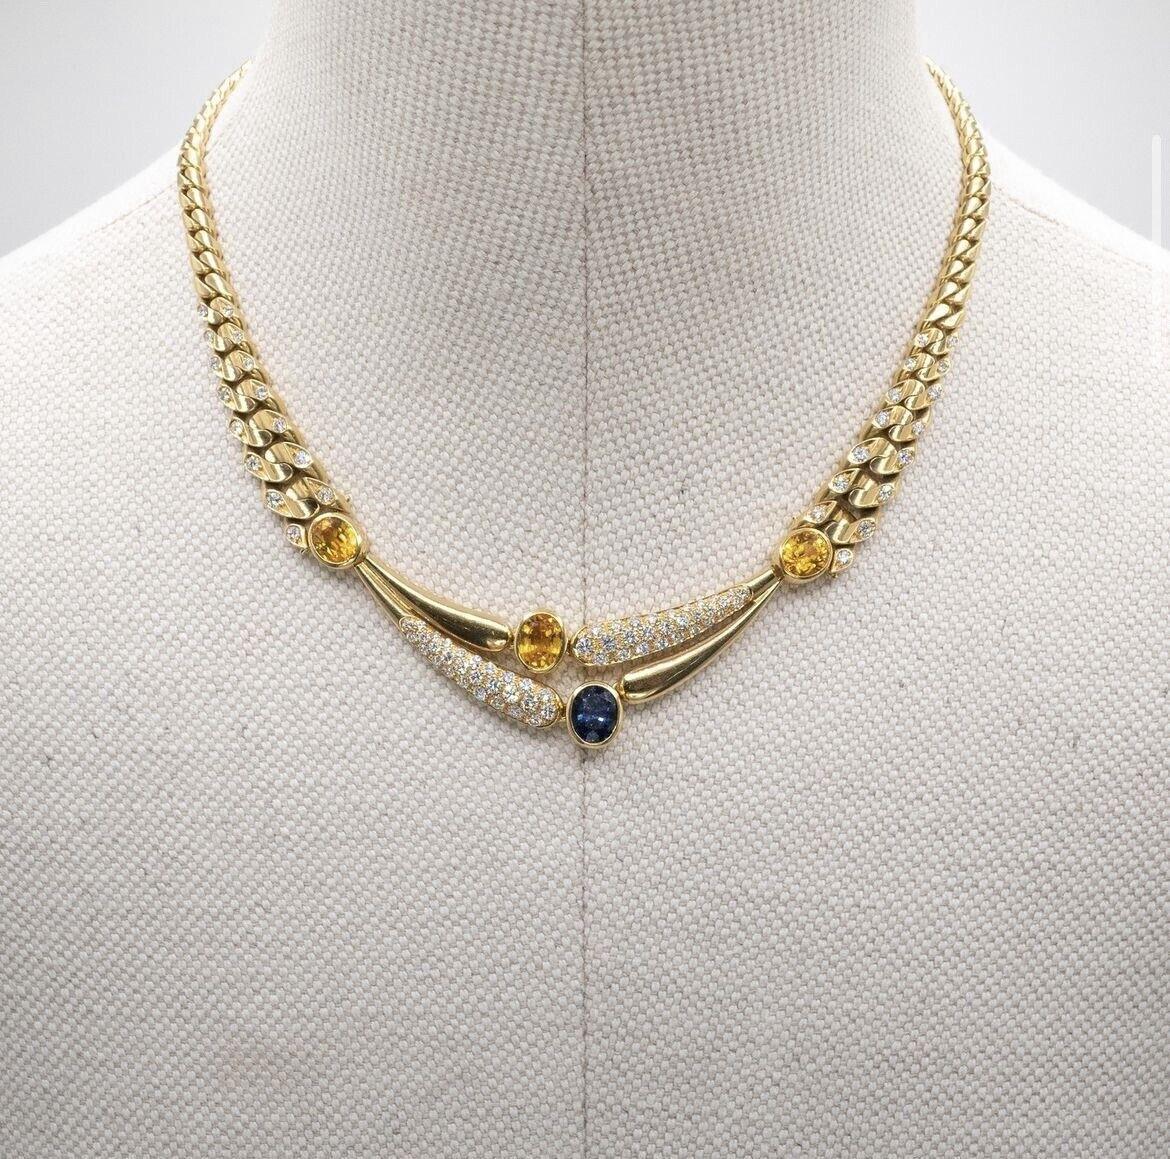 BVLGARI Italy 18k YG, Diamond, Blue & Yellow Sapphire Curb Link Necklace 1970s For Sale 3